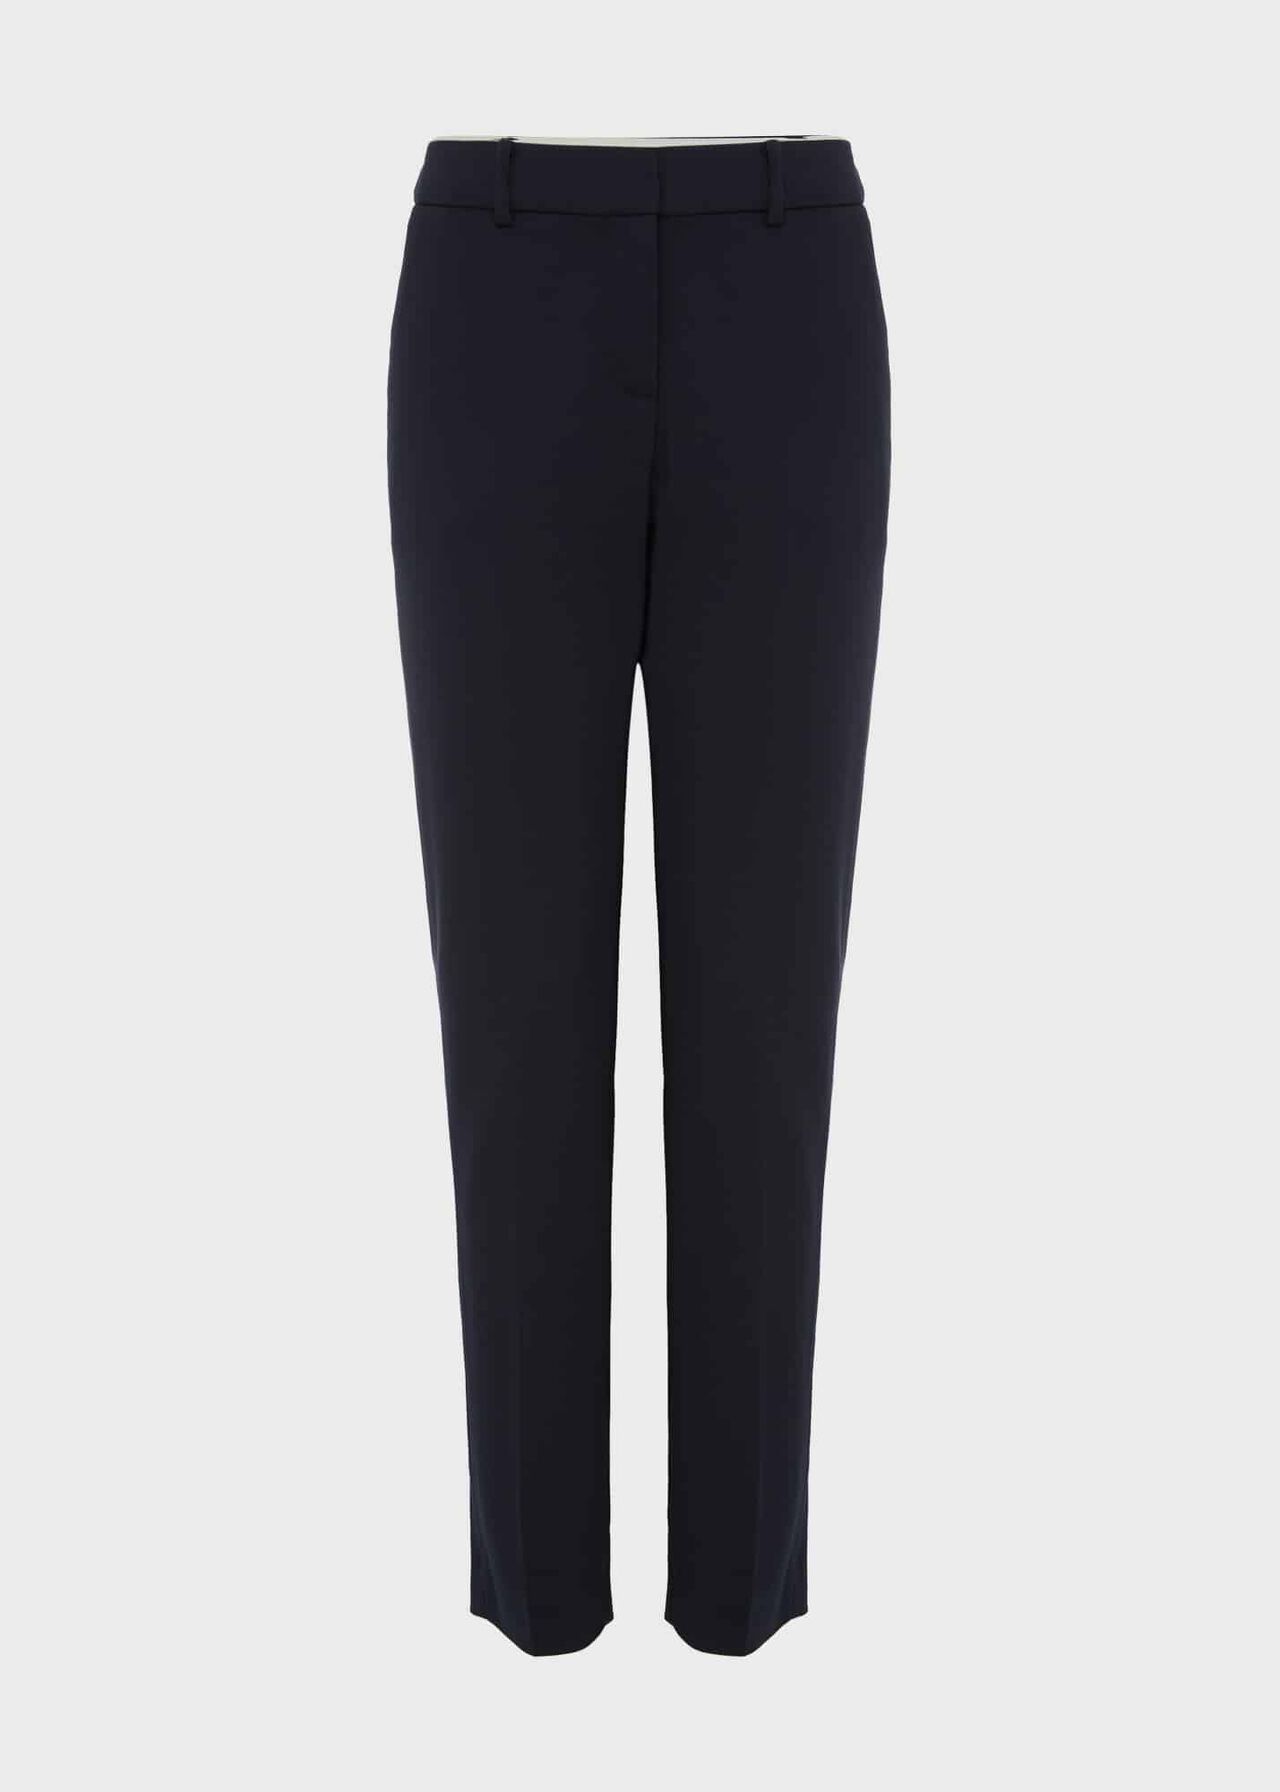 Quin Tapered Trouser, Navy, hi-res